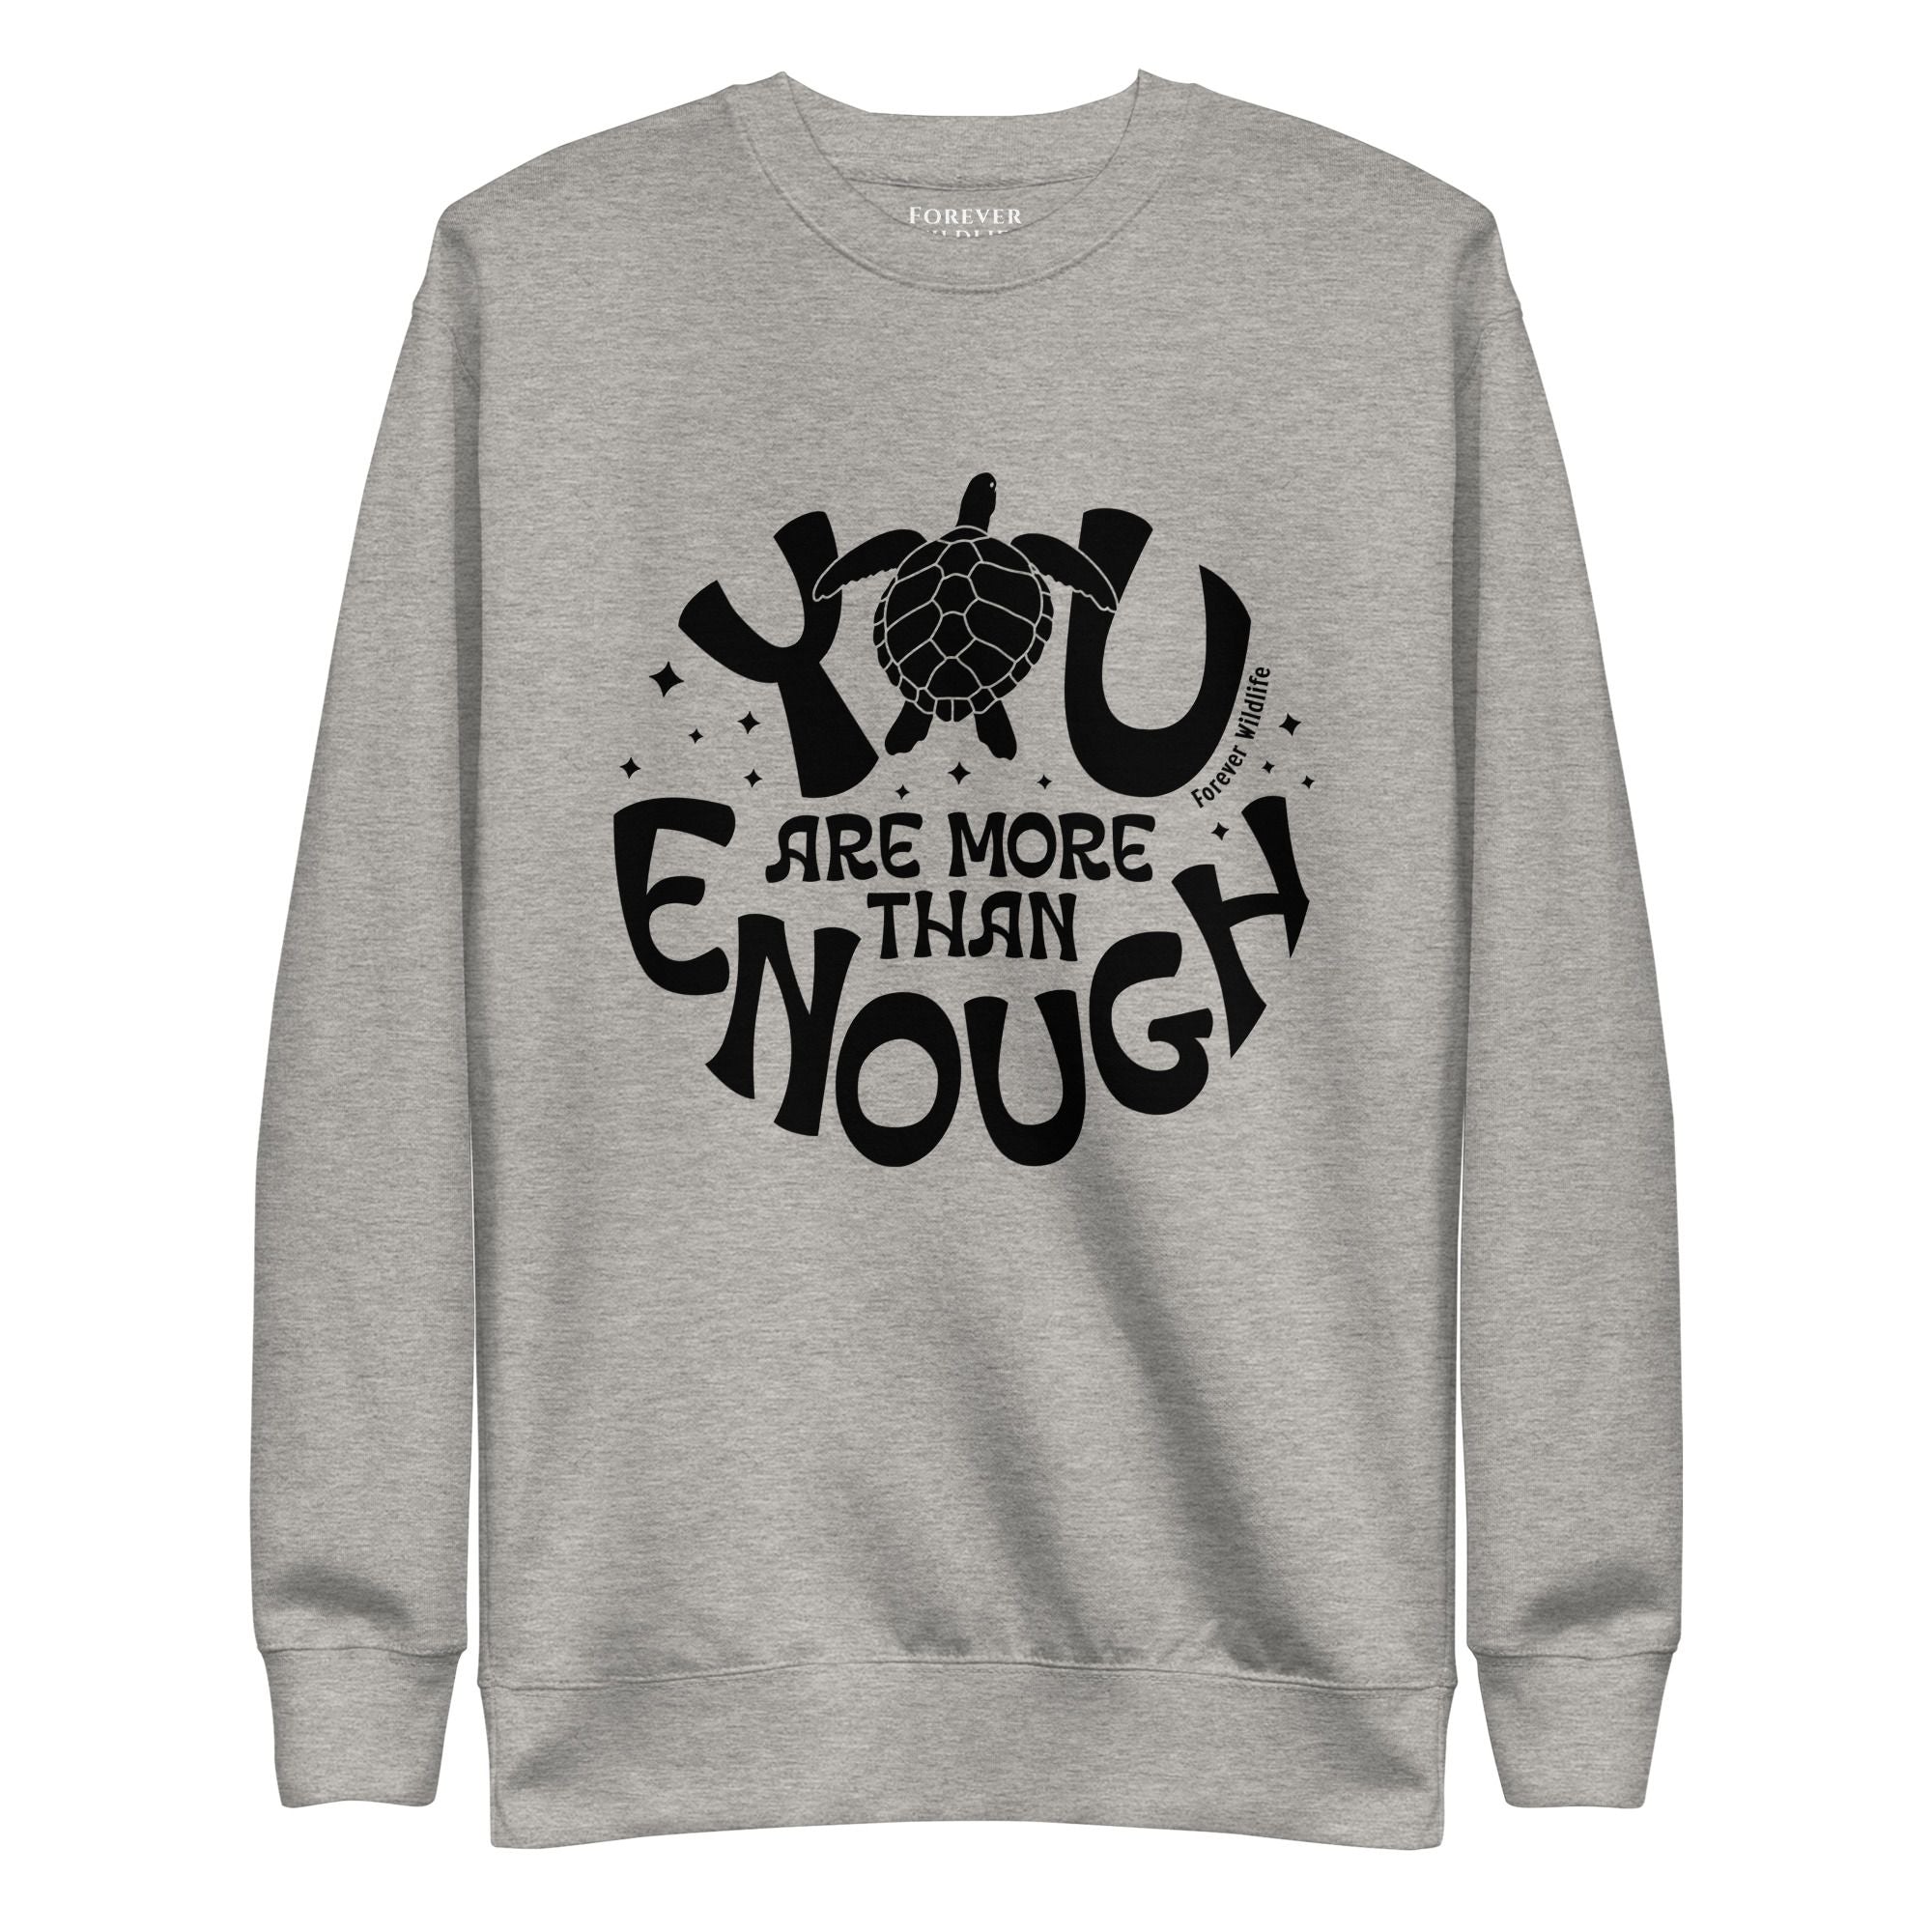 Sea Turtle Sweatshirt in Grey-Premium Wildlife Animal Inspiration Sweatshirt Design with 'You Are More Than Enough' text, part of Wildlife Sweatshirts & Clothing from Forever Wildlife.